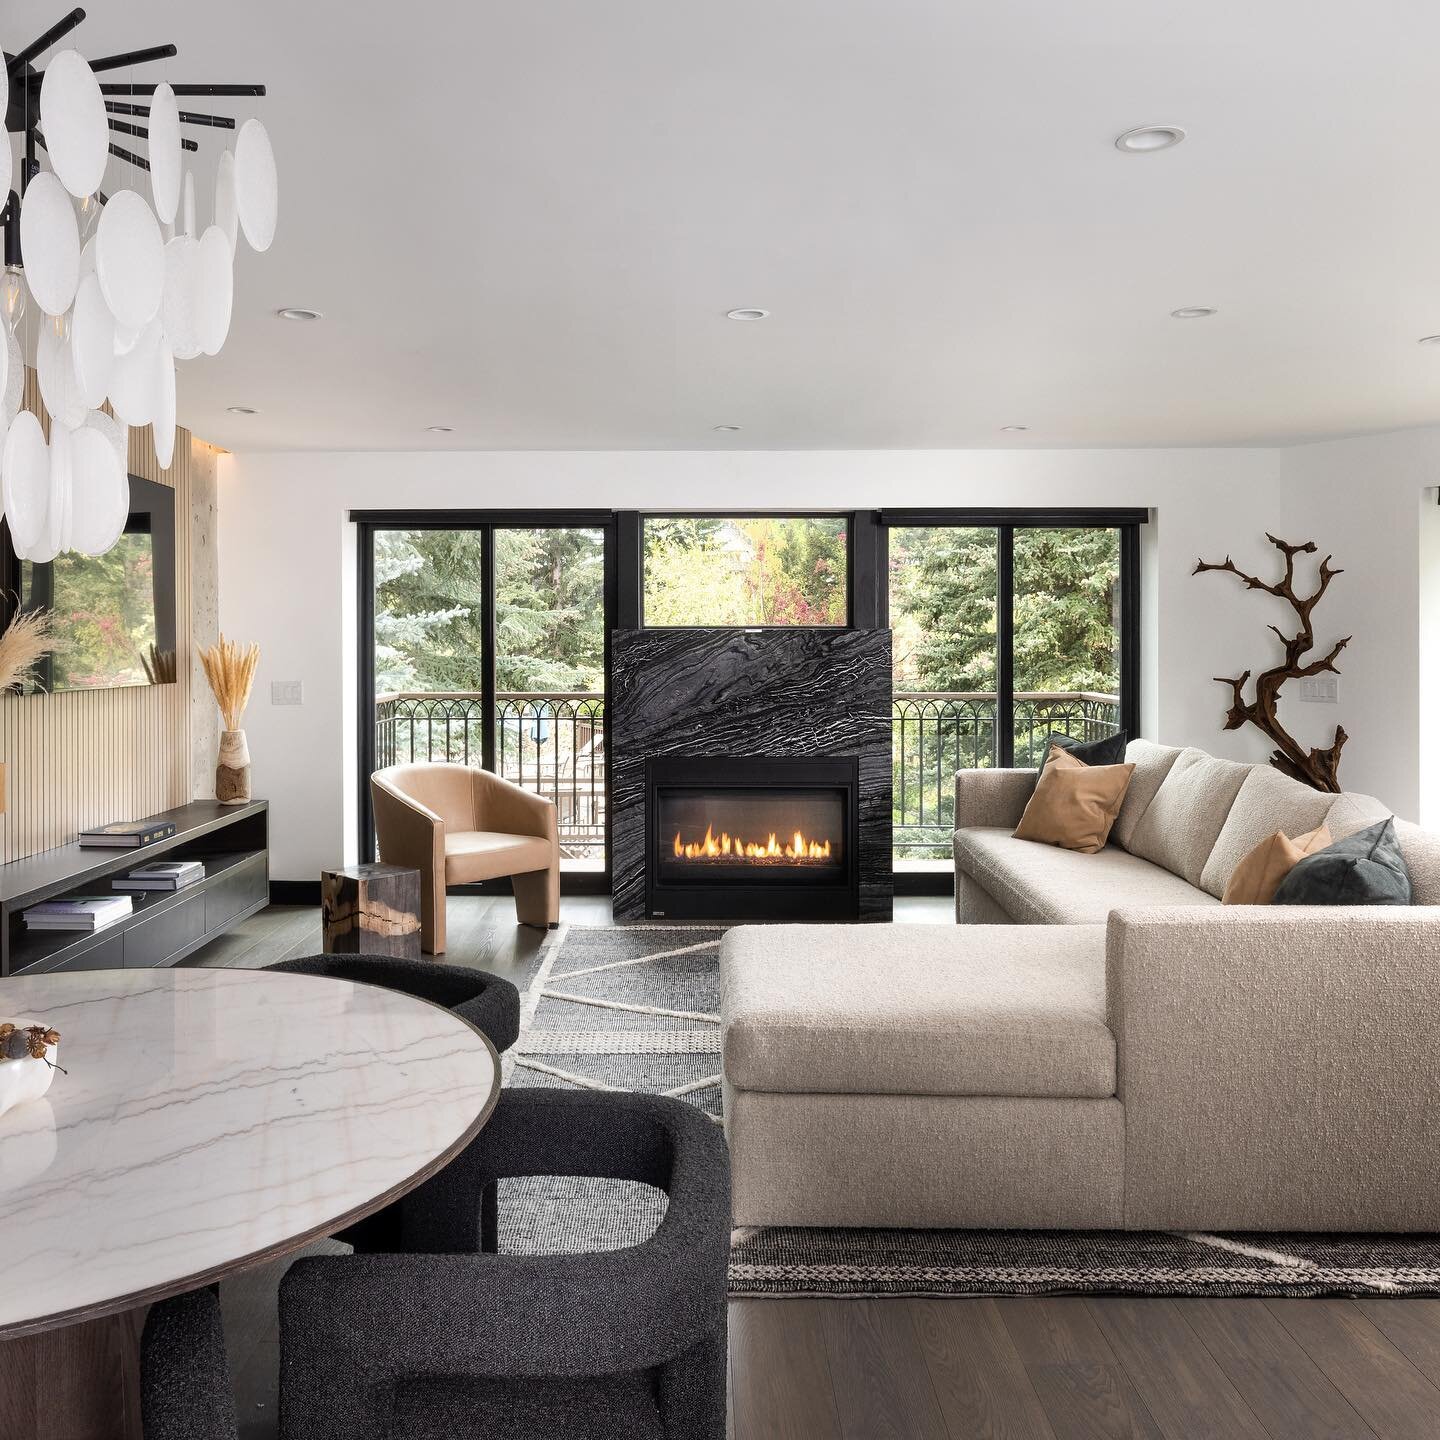 Iconic example of bringing those outdoors in. In this space, we moved the fireplace between the existing sliding doors and added a window above to not only bring in natural light, also creating a unique focal point. 

Photo: @stovallstudio 

#interio